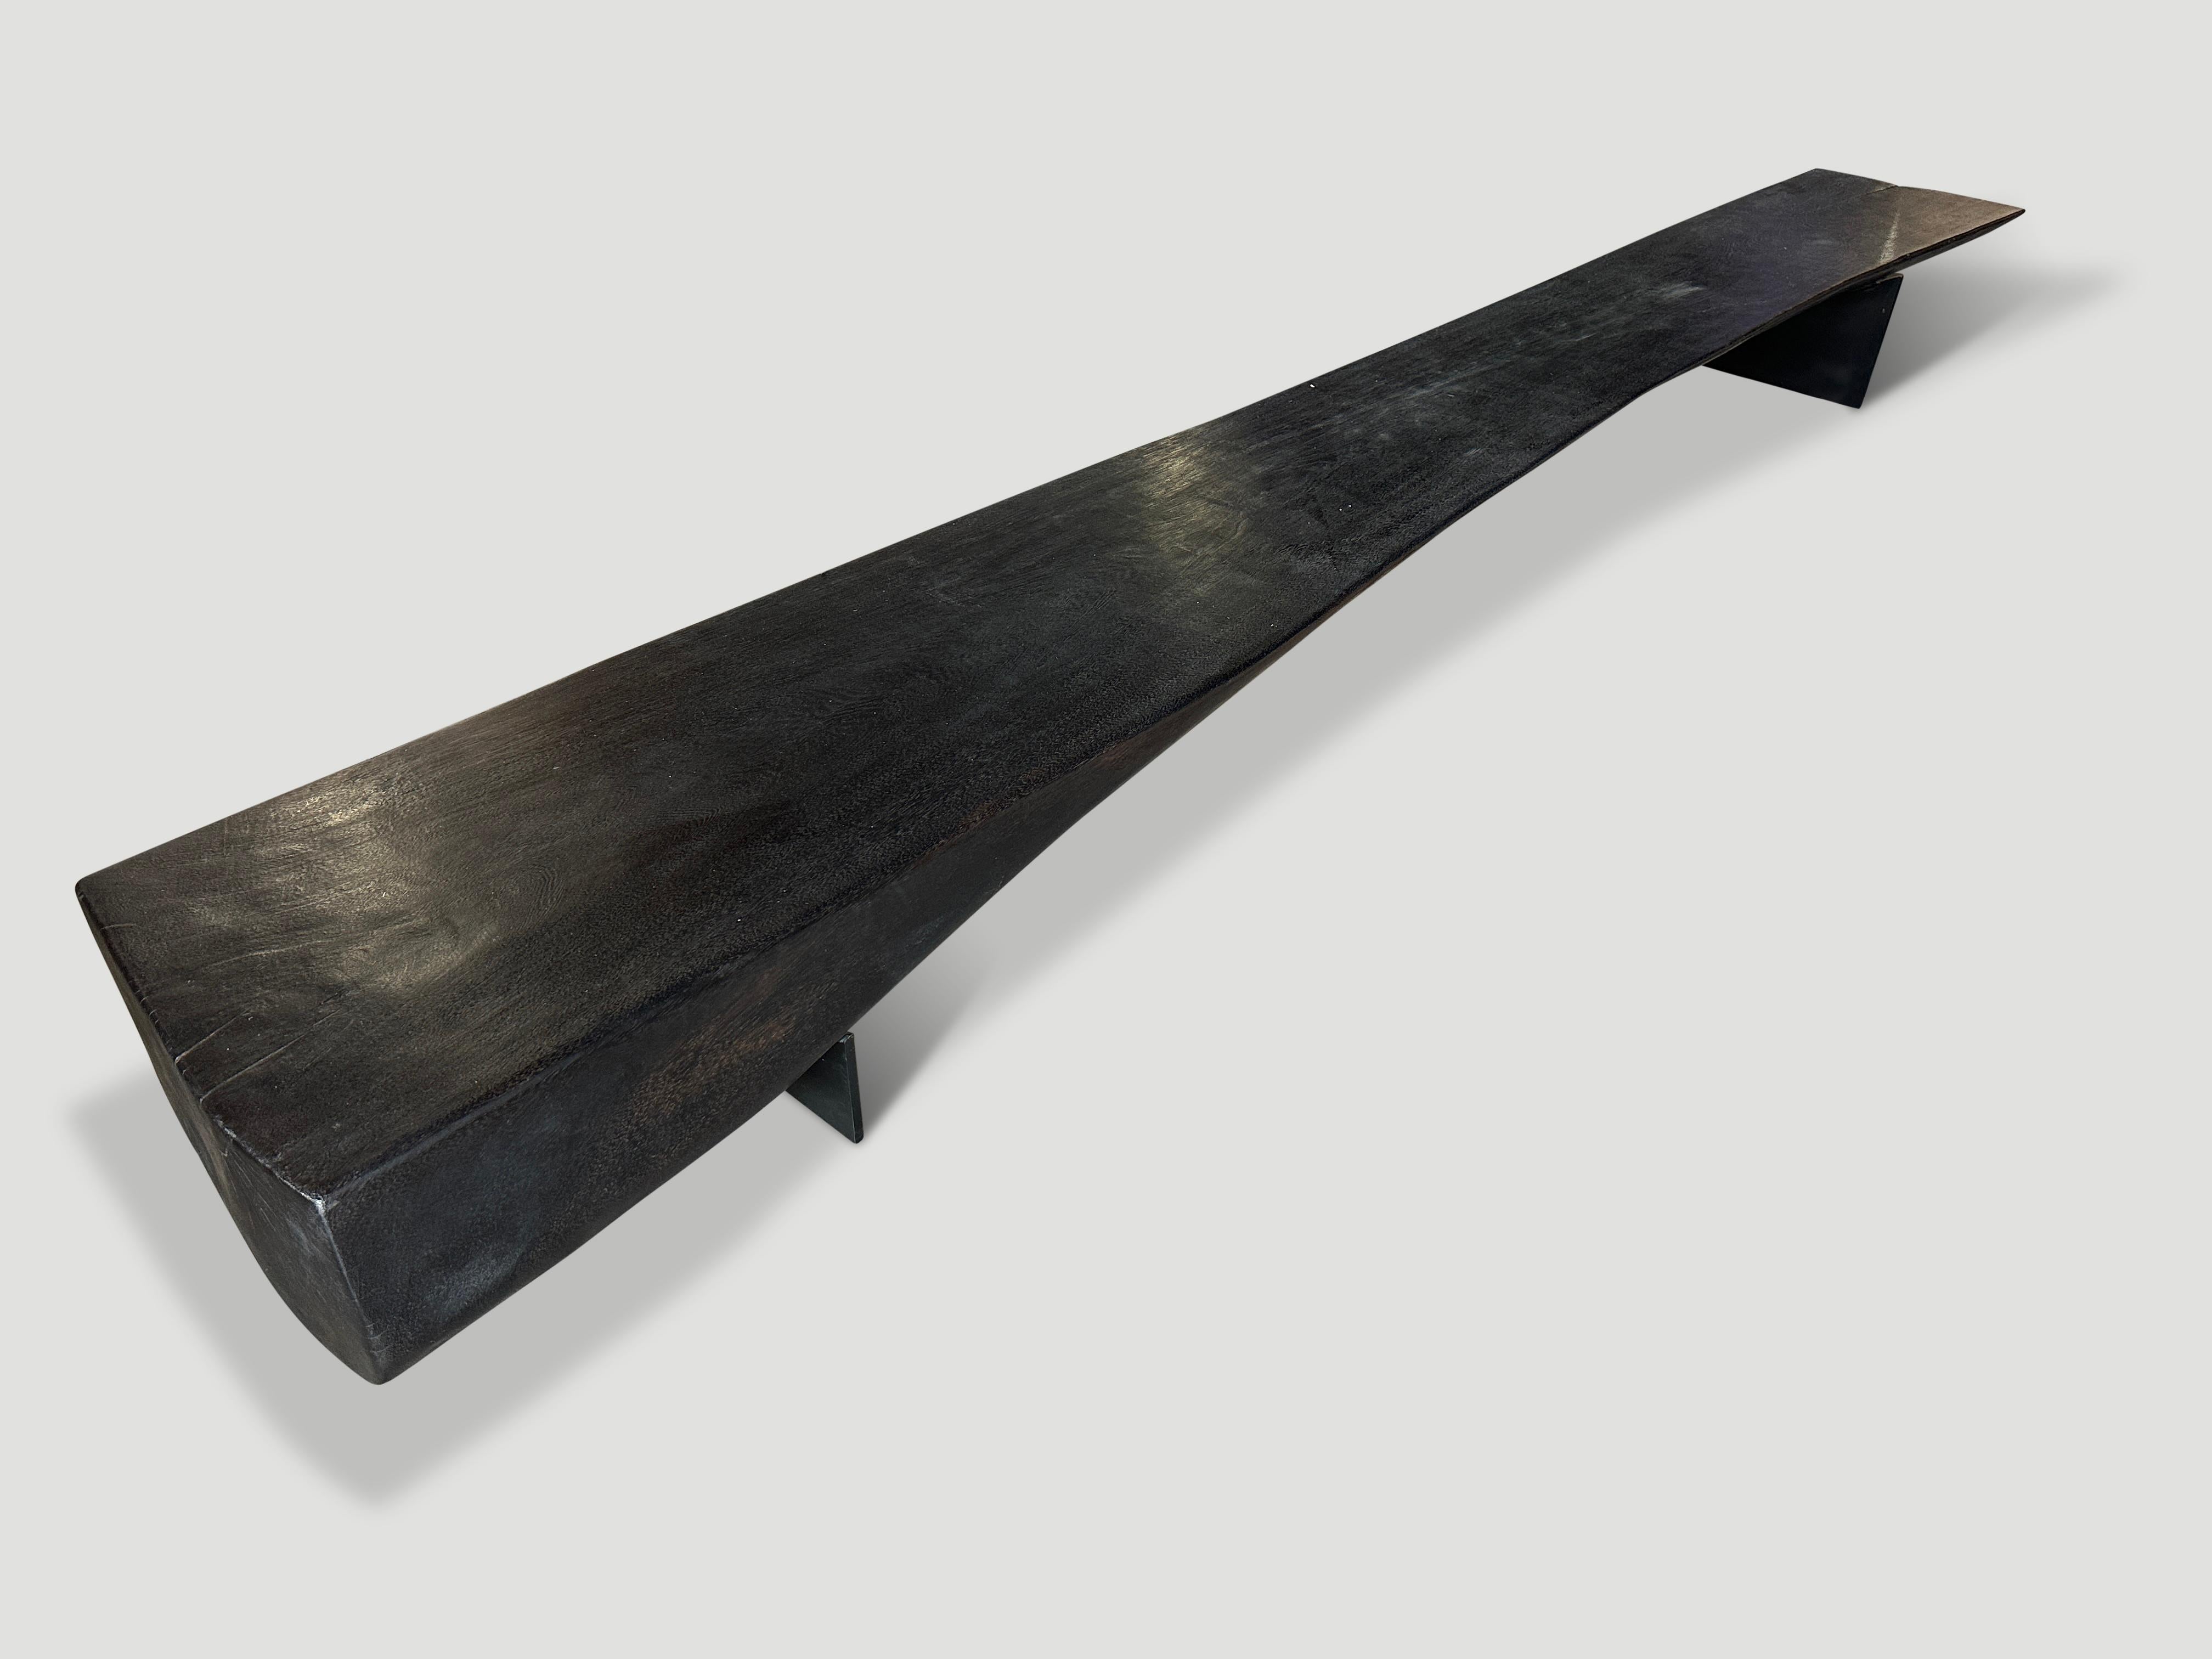 A beautiful suar wood reclaimed log has been cut in half to produce this dramatic long bench with a live edge from 20” to 15” wide. We added sleek minimalist steel legs in contrast to this ten inch thick log. Lightly charred revealing the unique